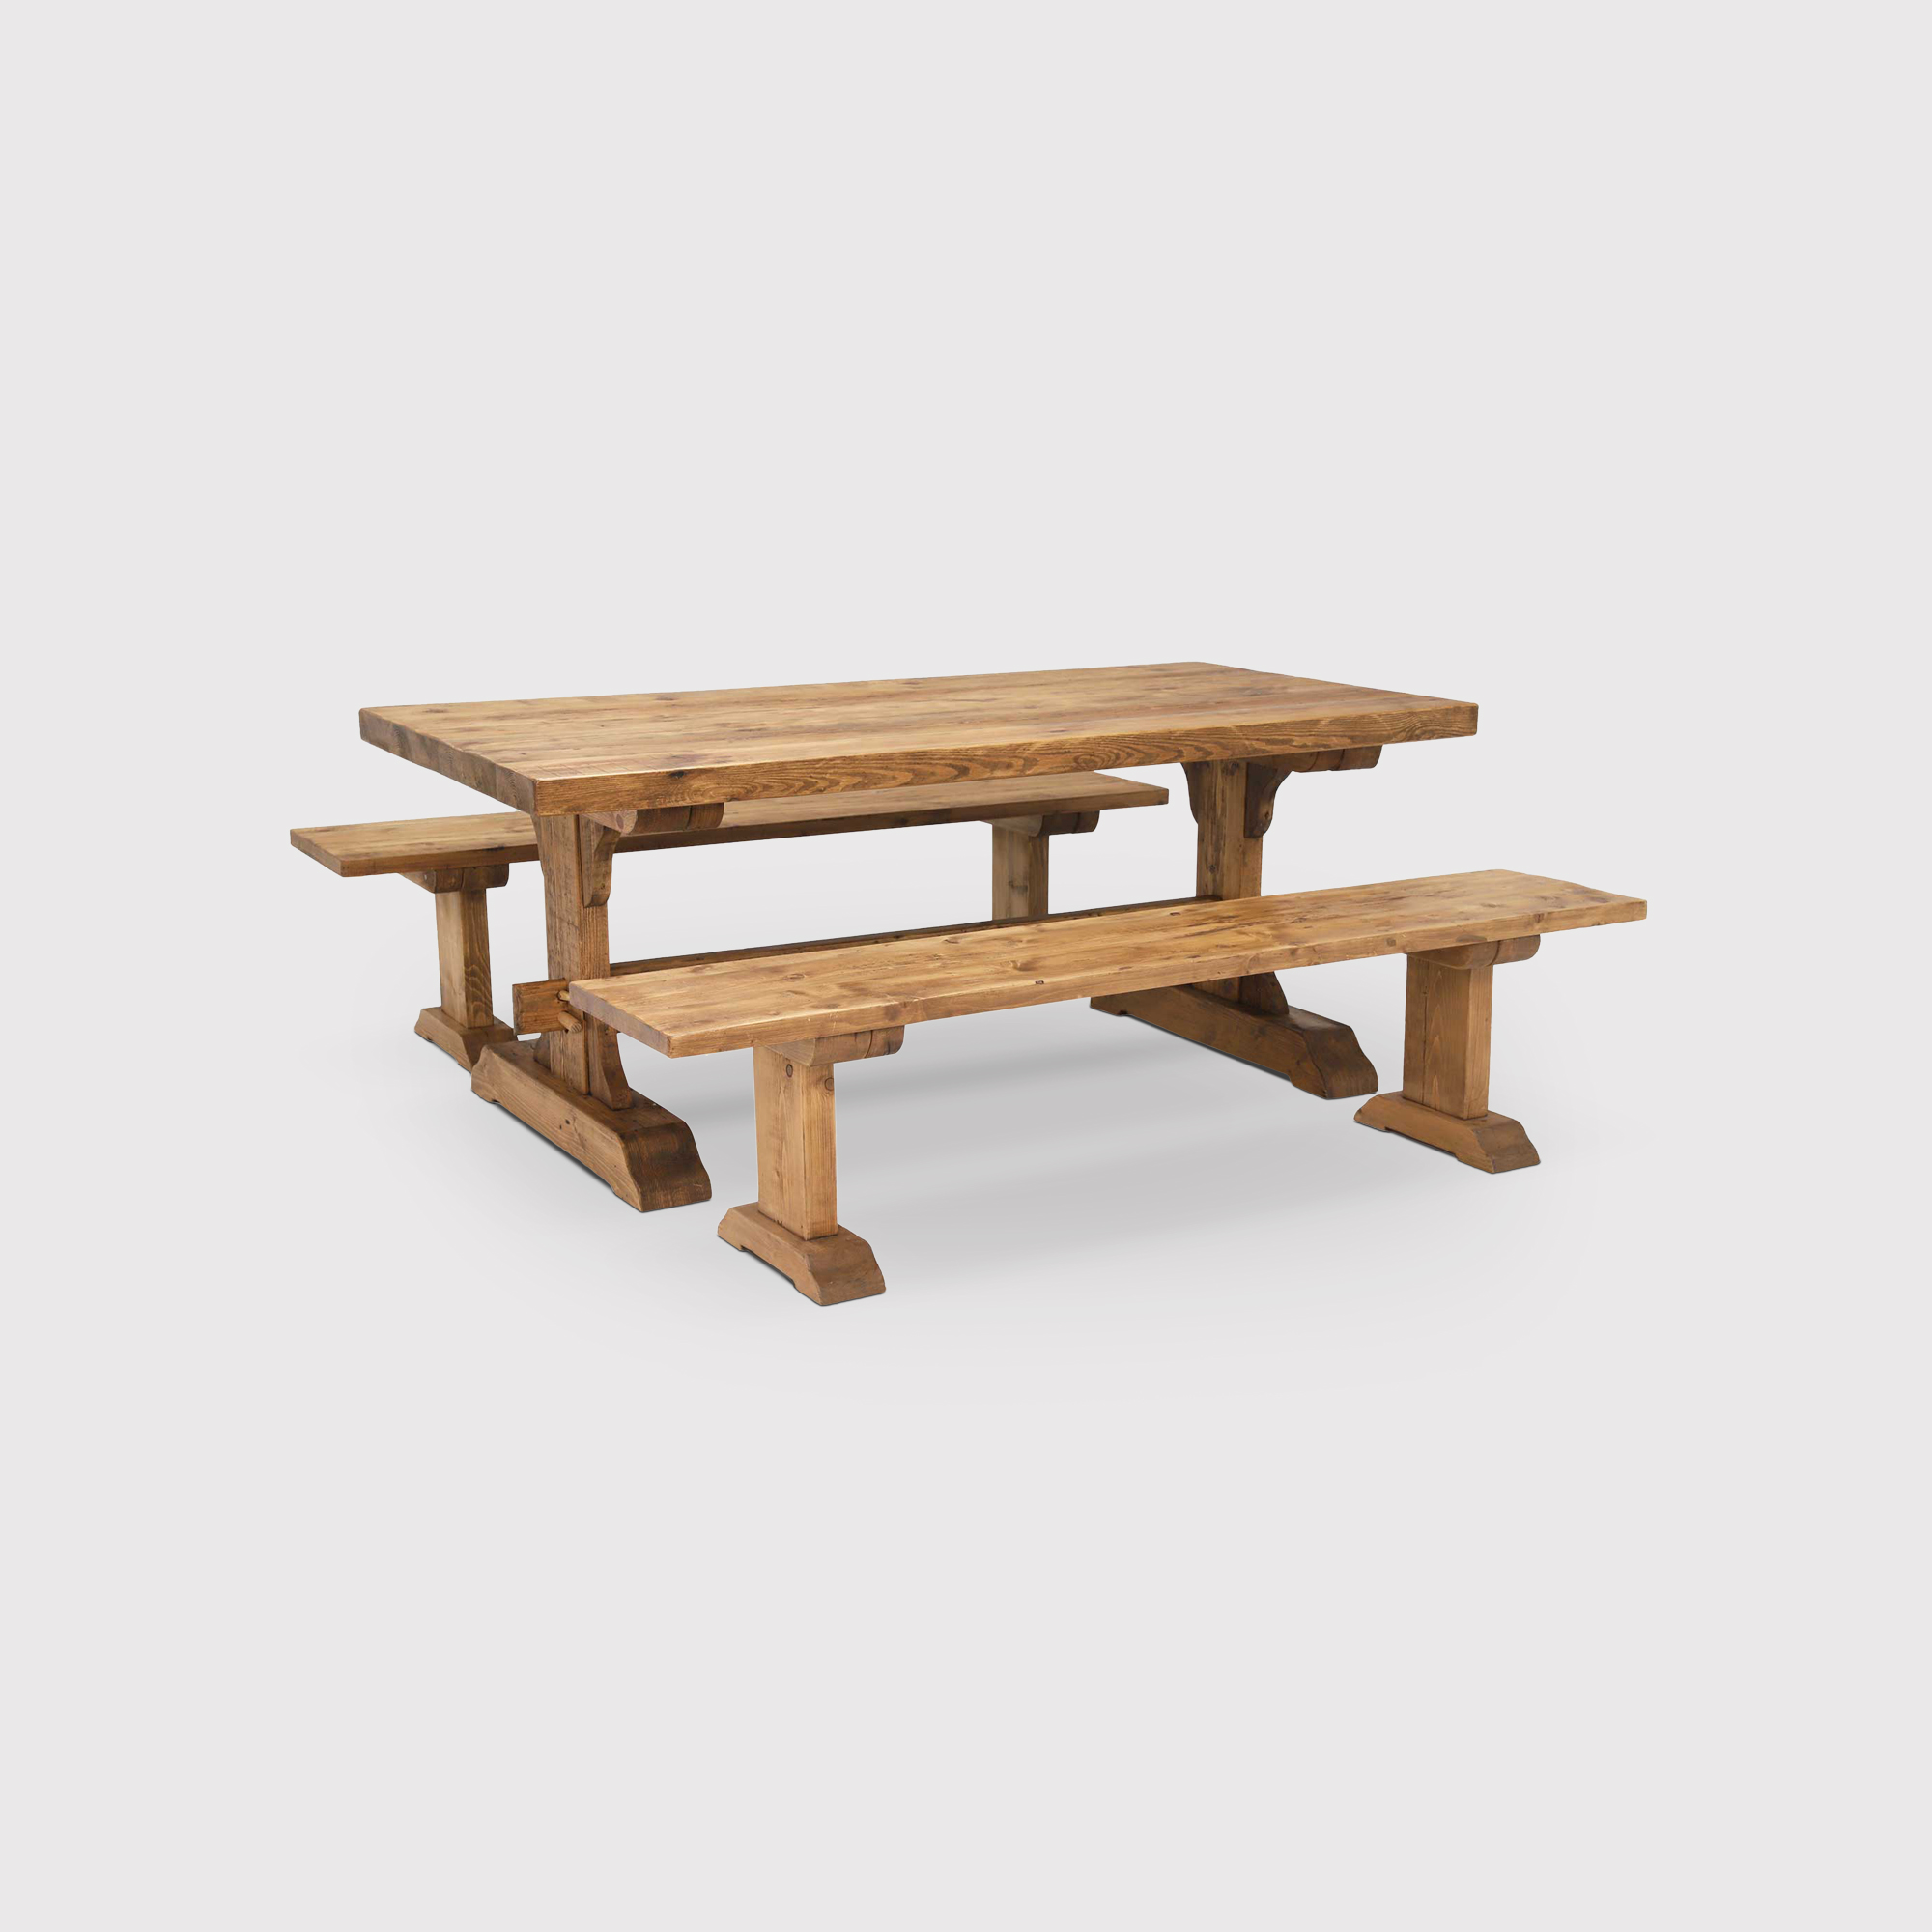 Covington Dining Table & 2 Benches, Brown | Barker & Stonehouse